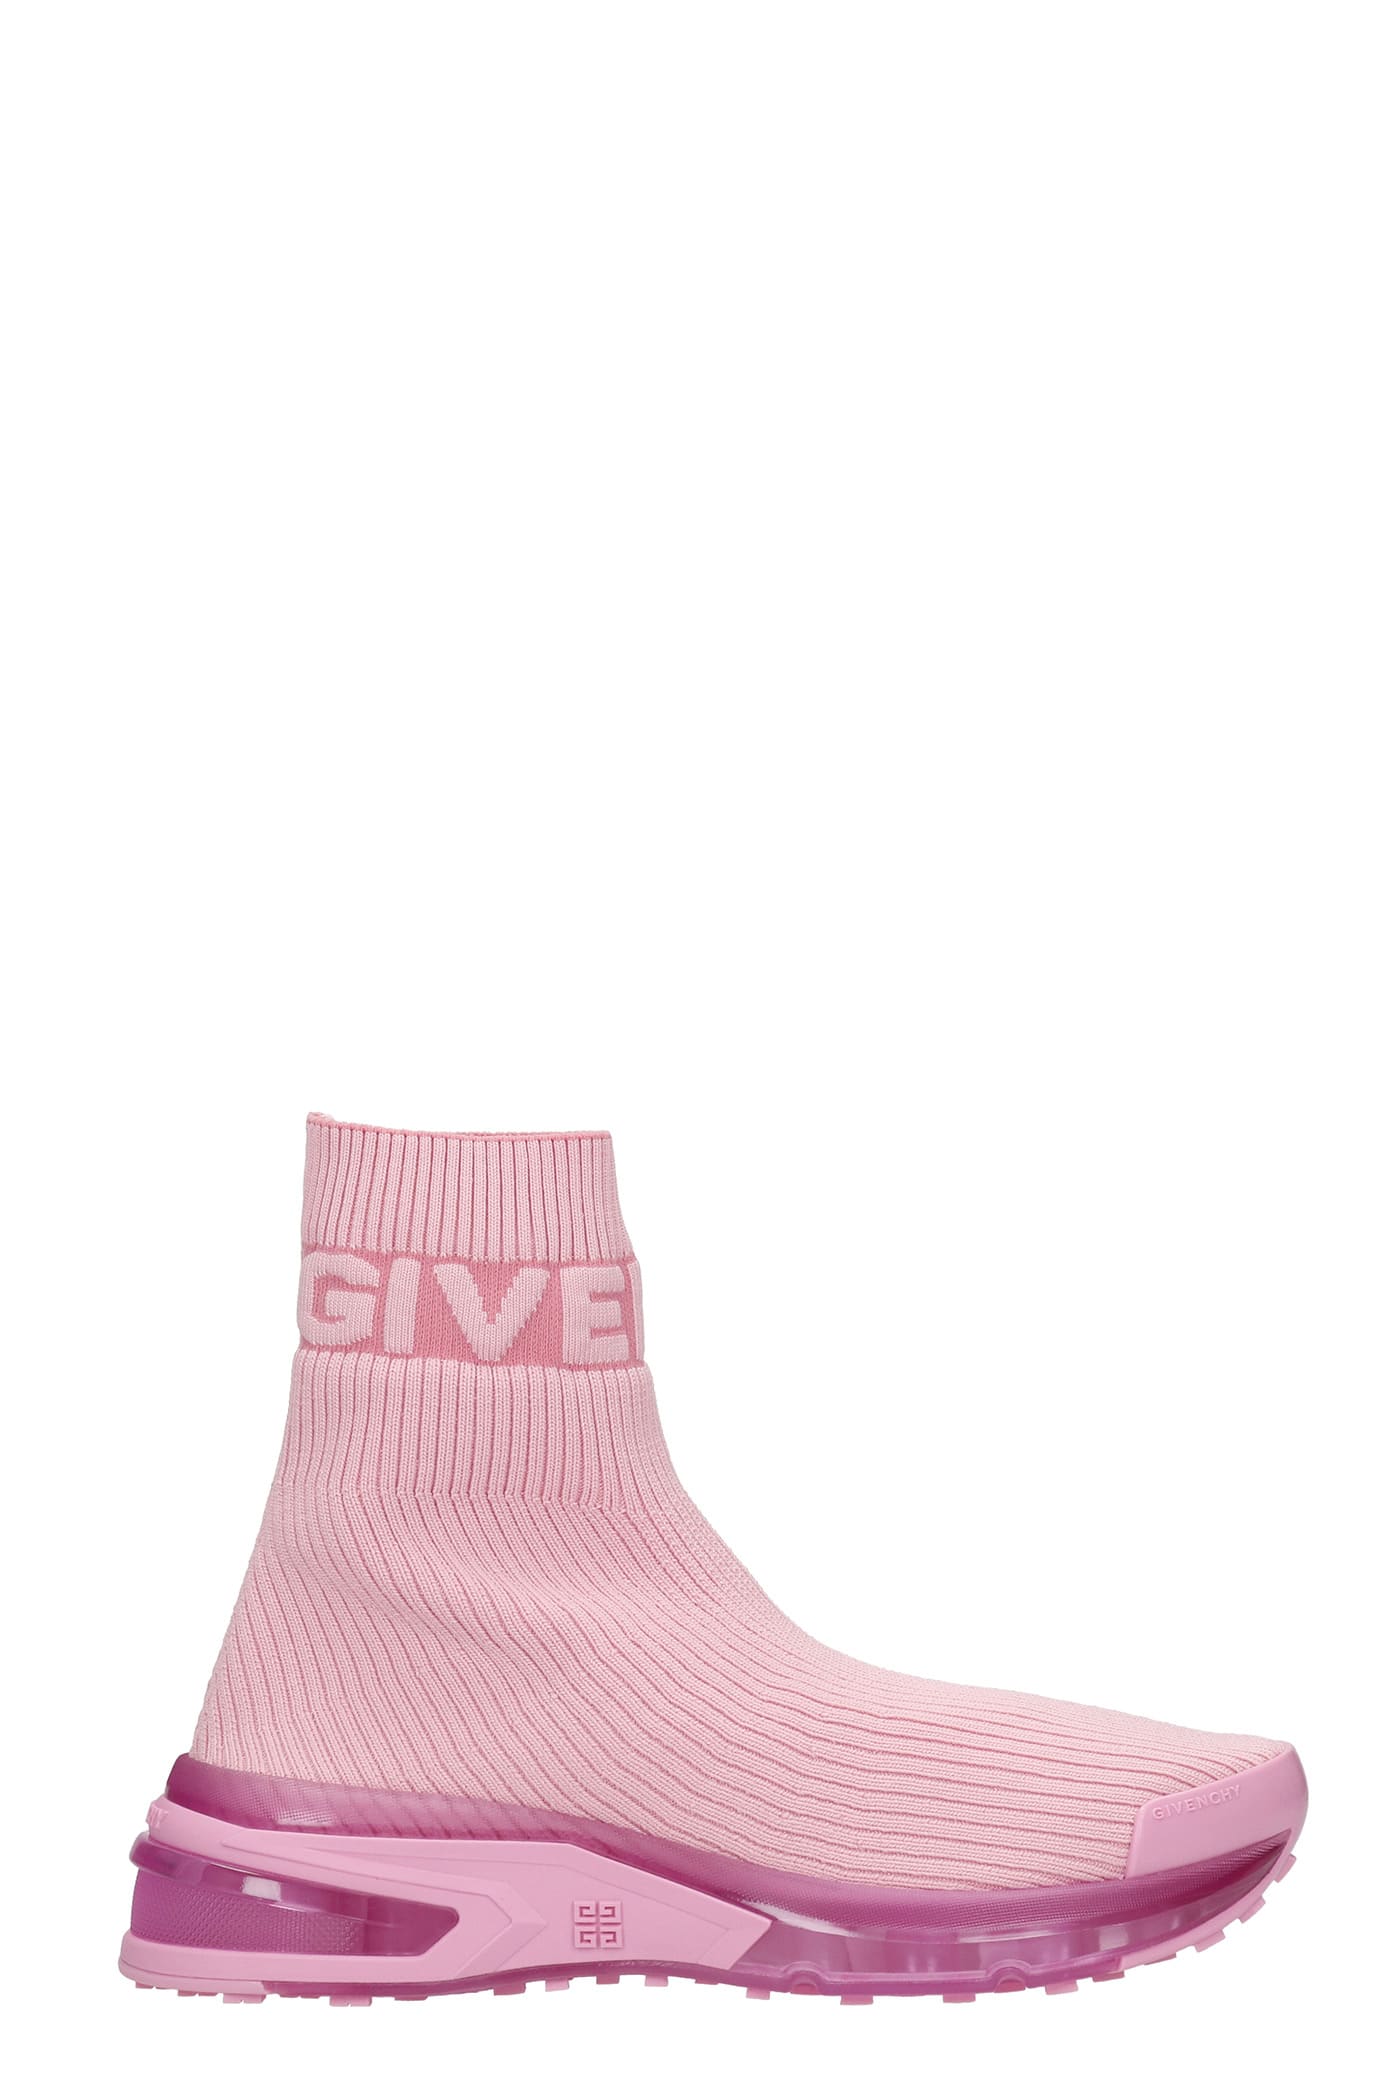 Givenchy Giv 1 Sneakers In Rose-pink Polyester